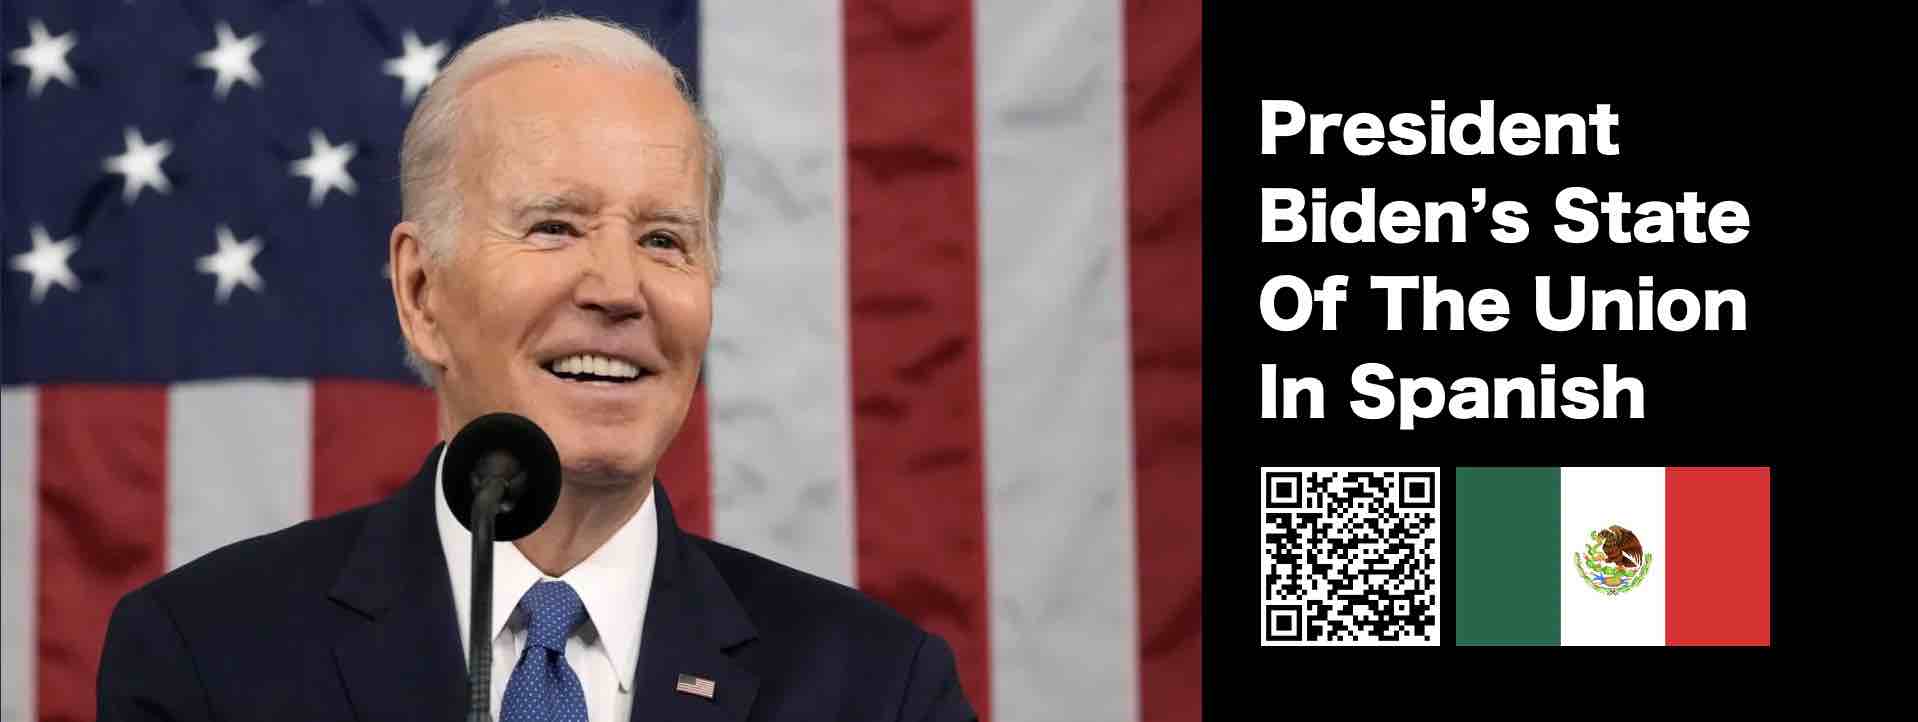 President Biden's State Of The Union